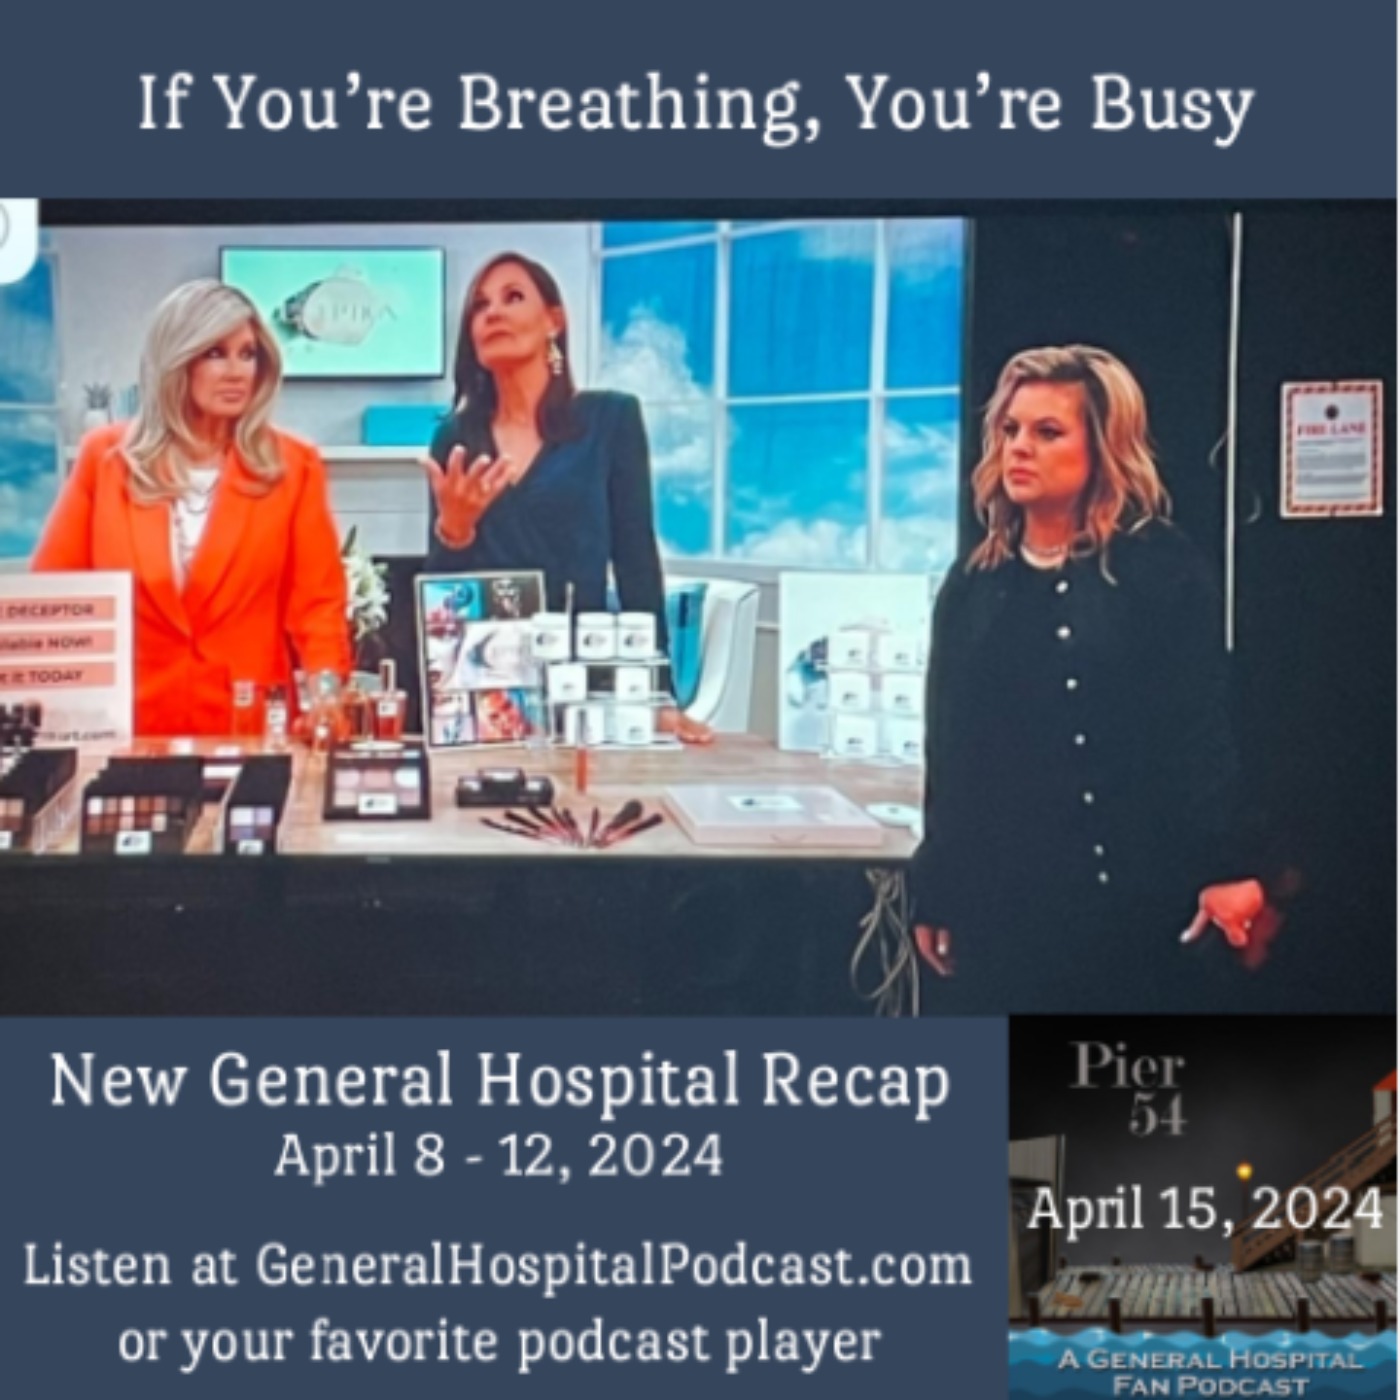 Episode 535: If You're Breathing, You're Busy